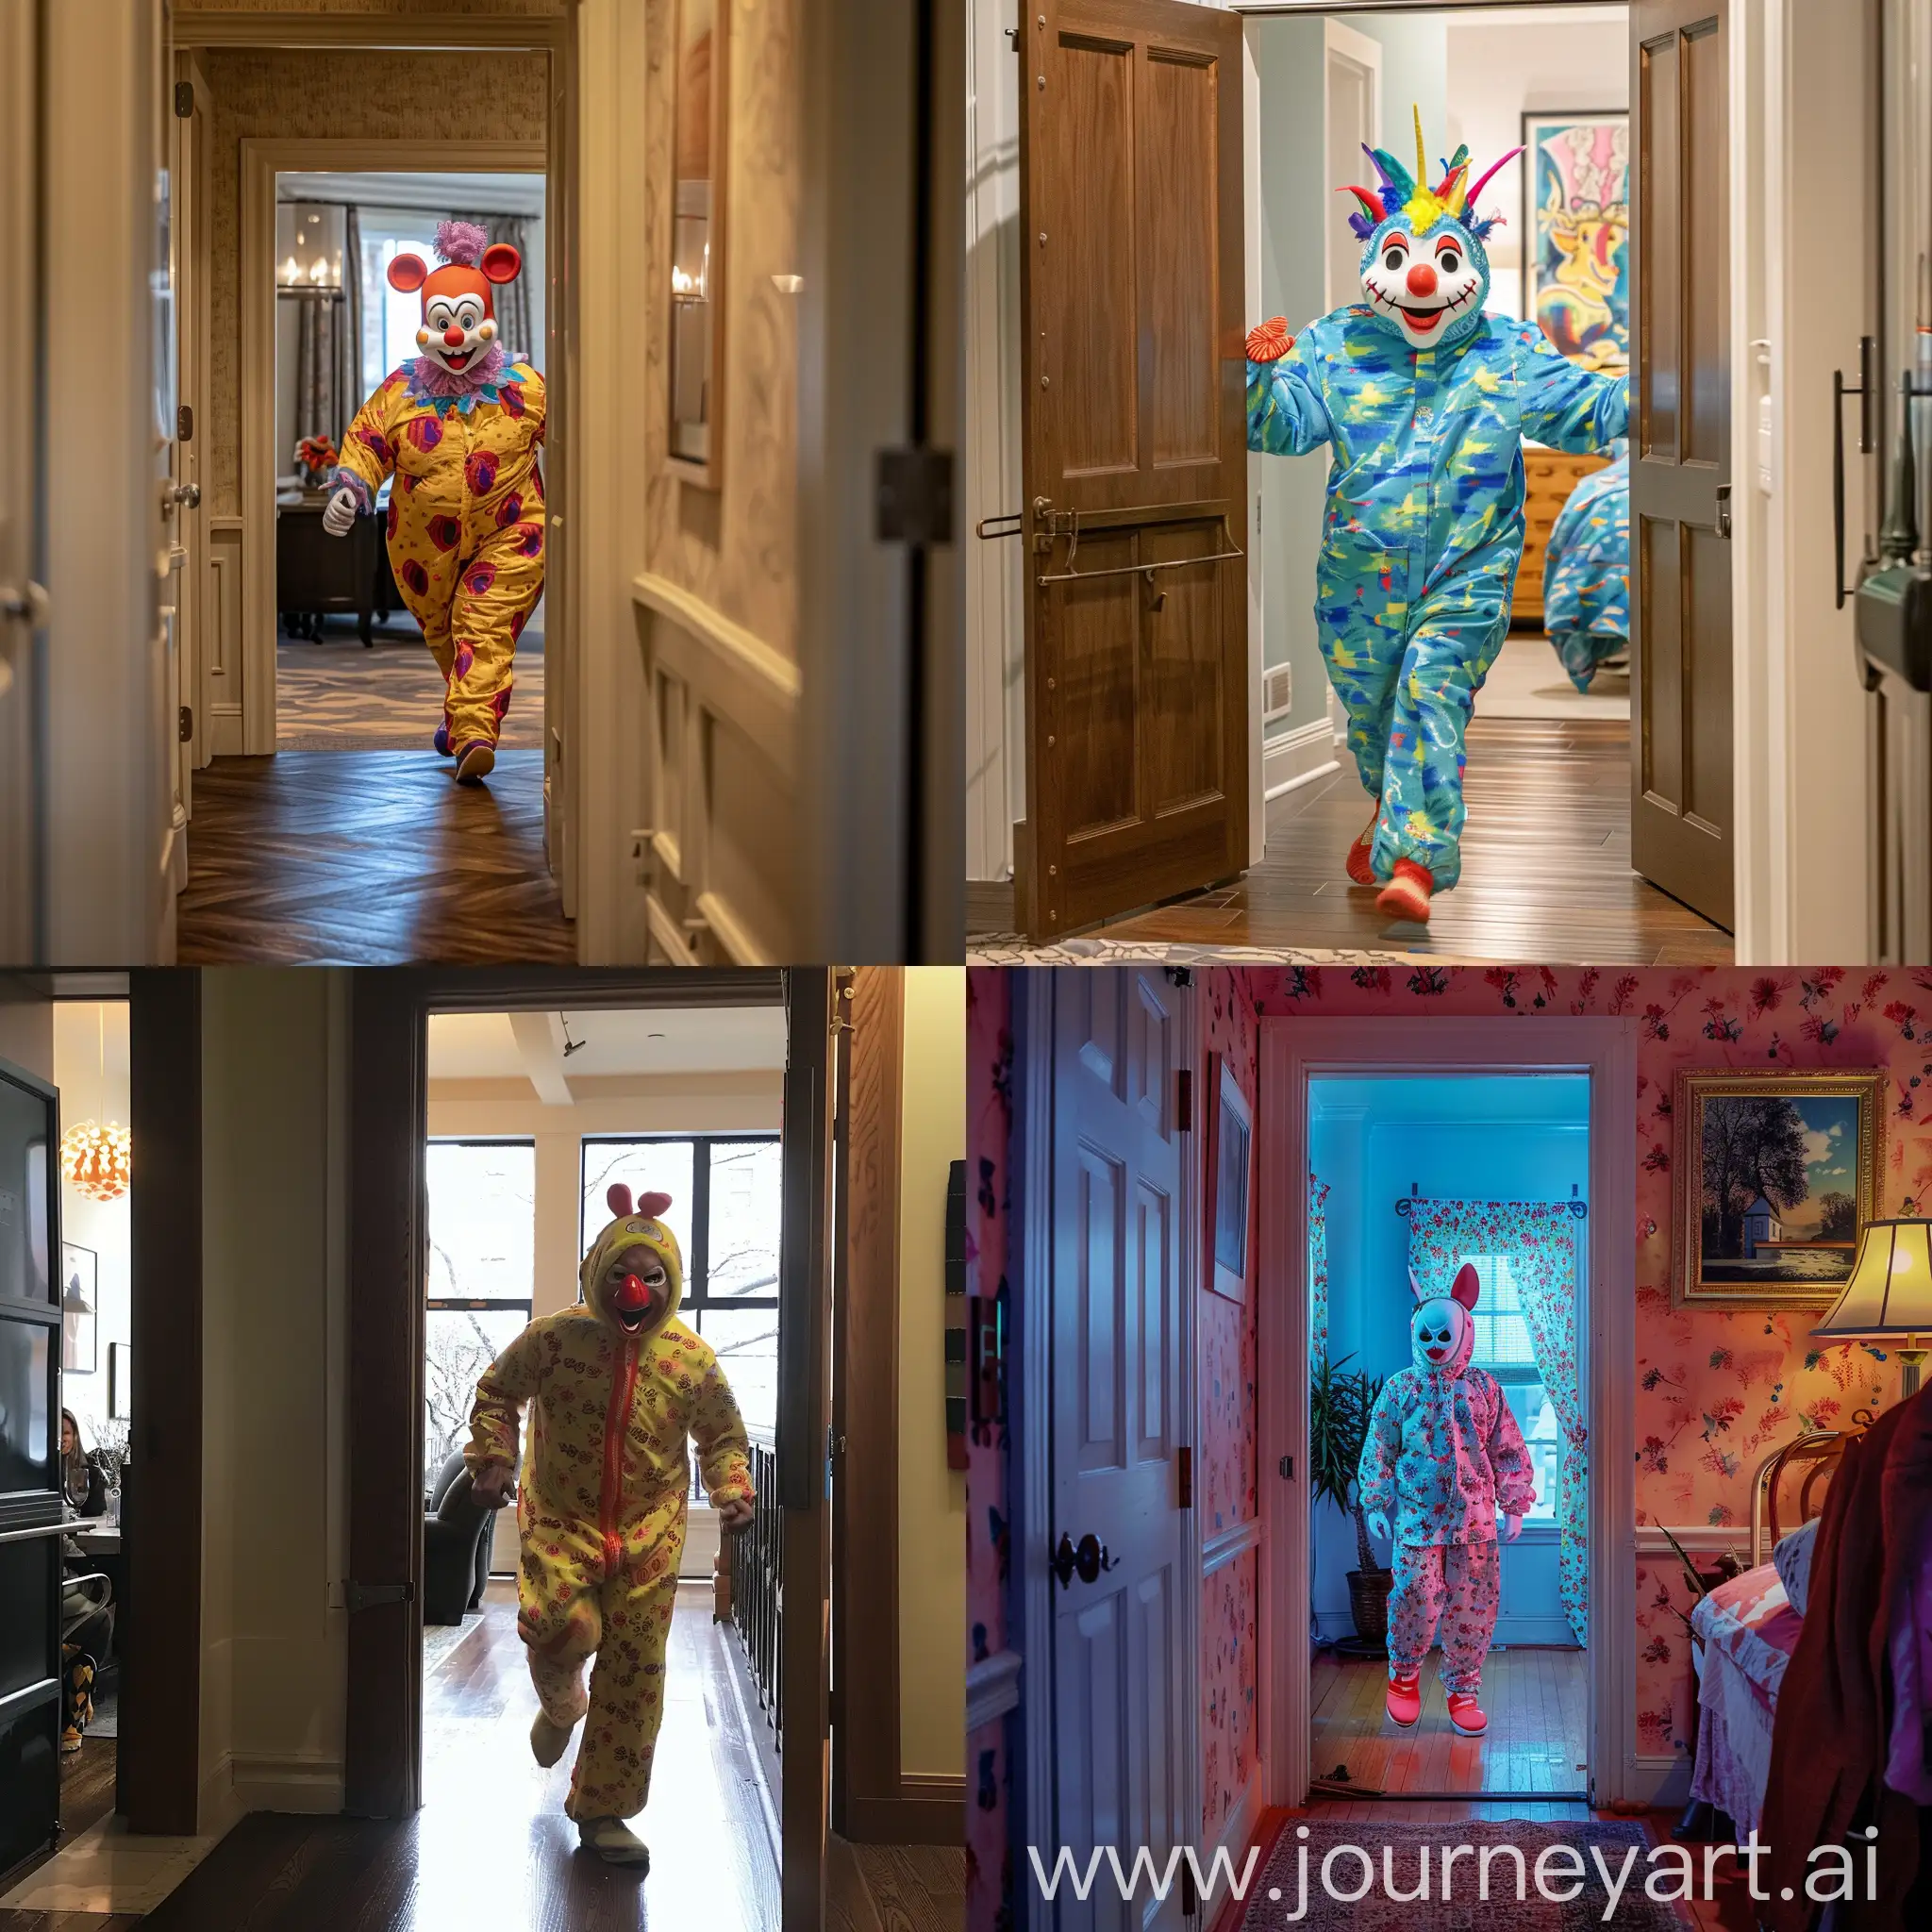 Funny-Costume-Entrance-Whimsical-Character-Brightens-Room